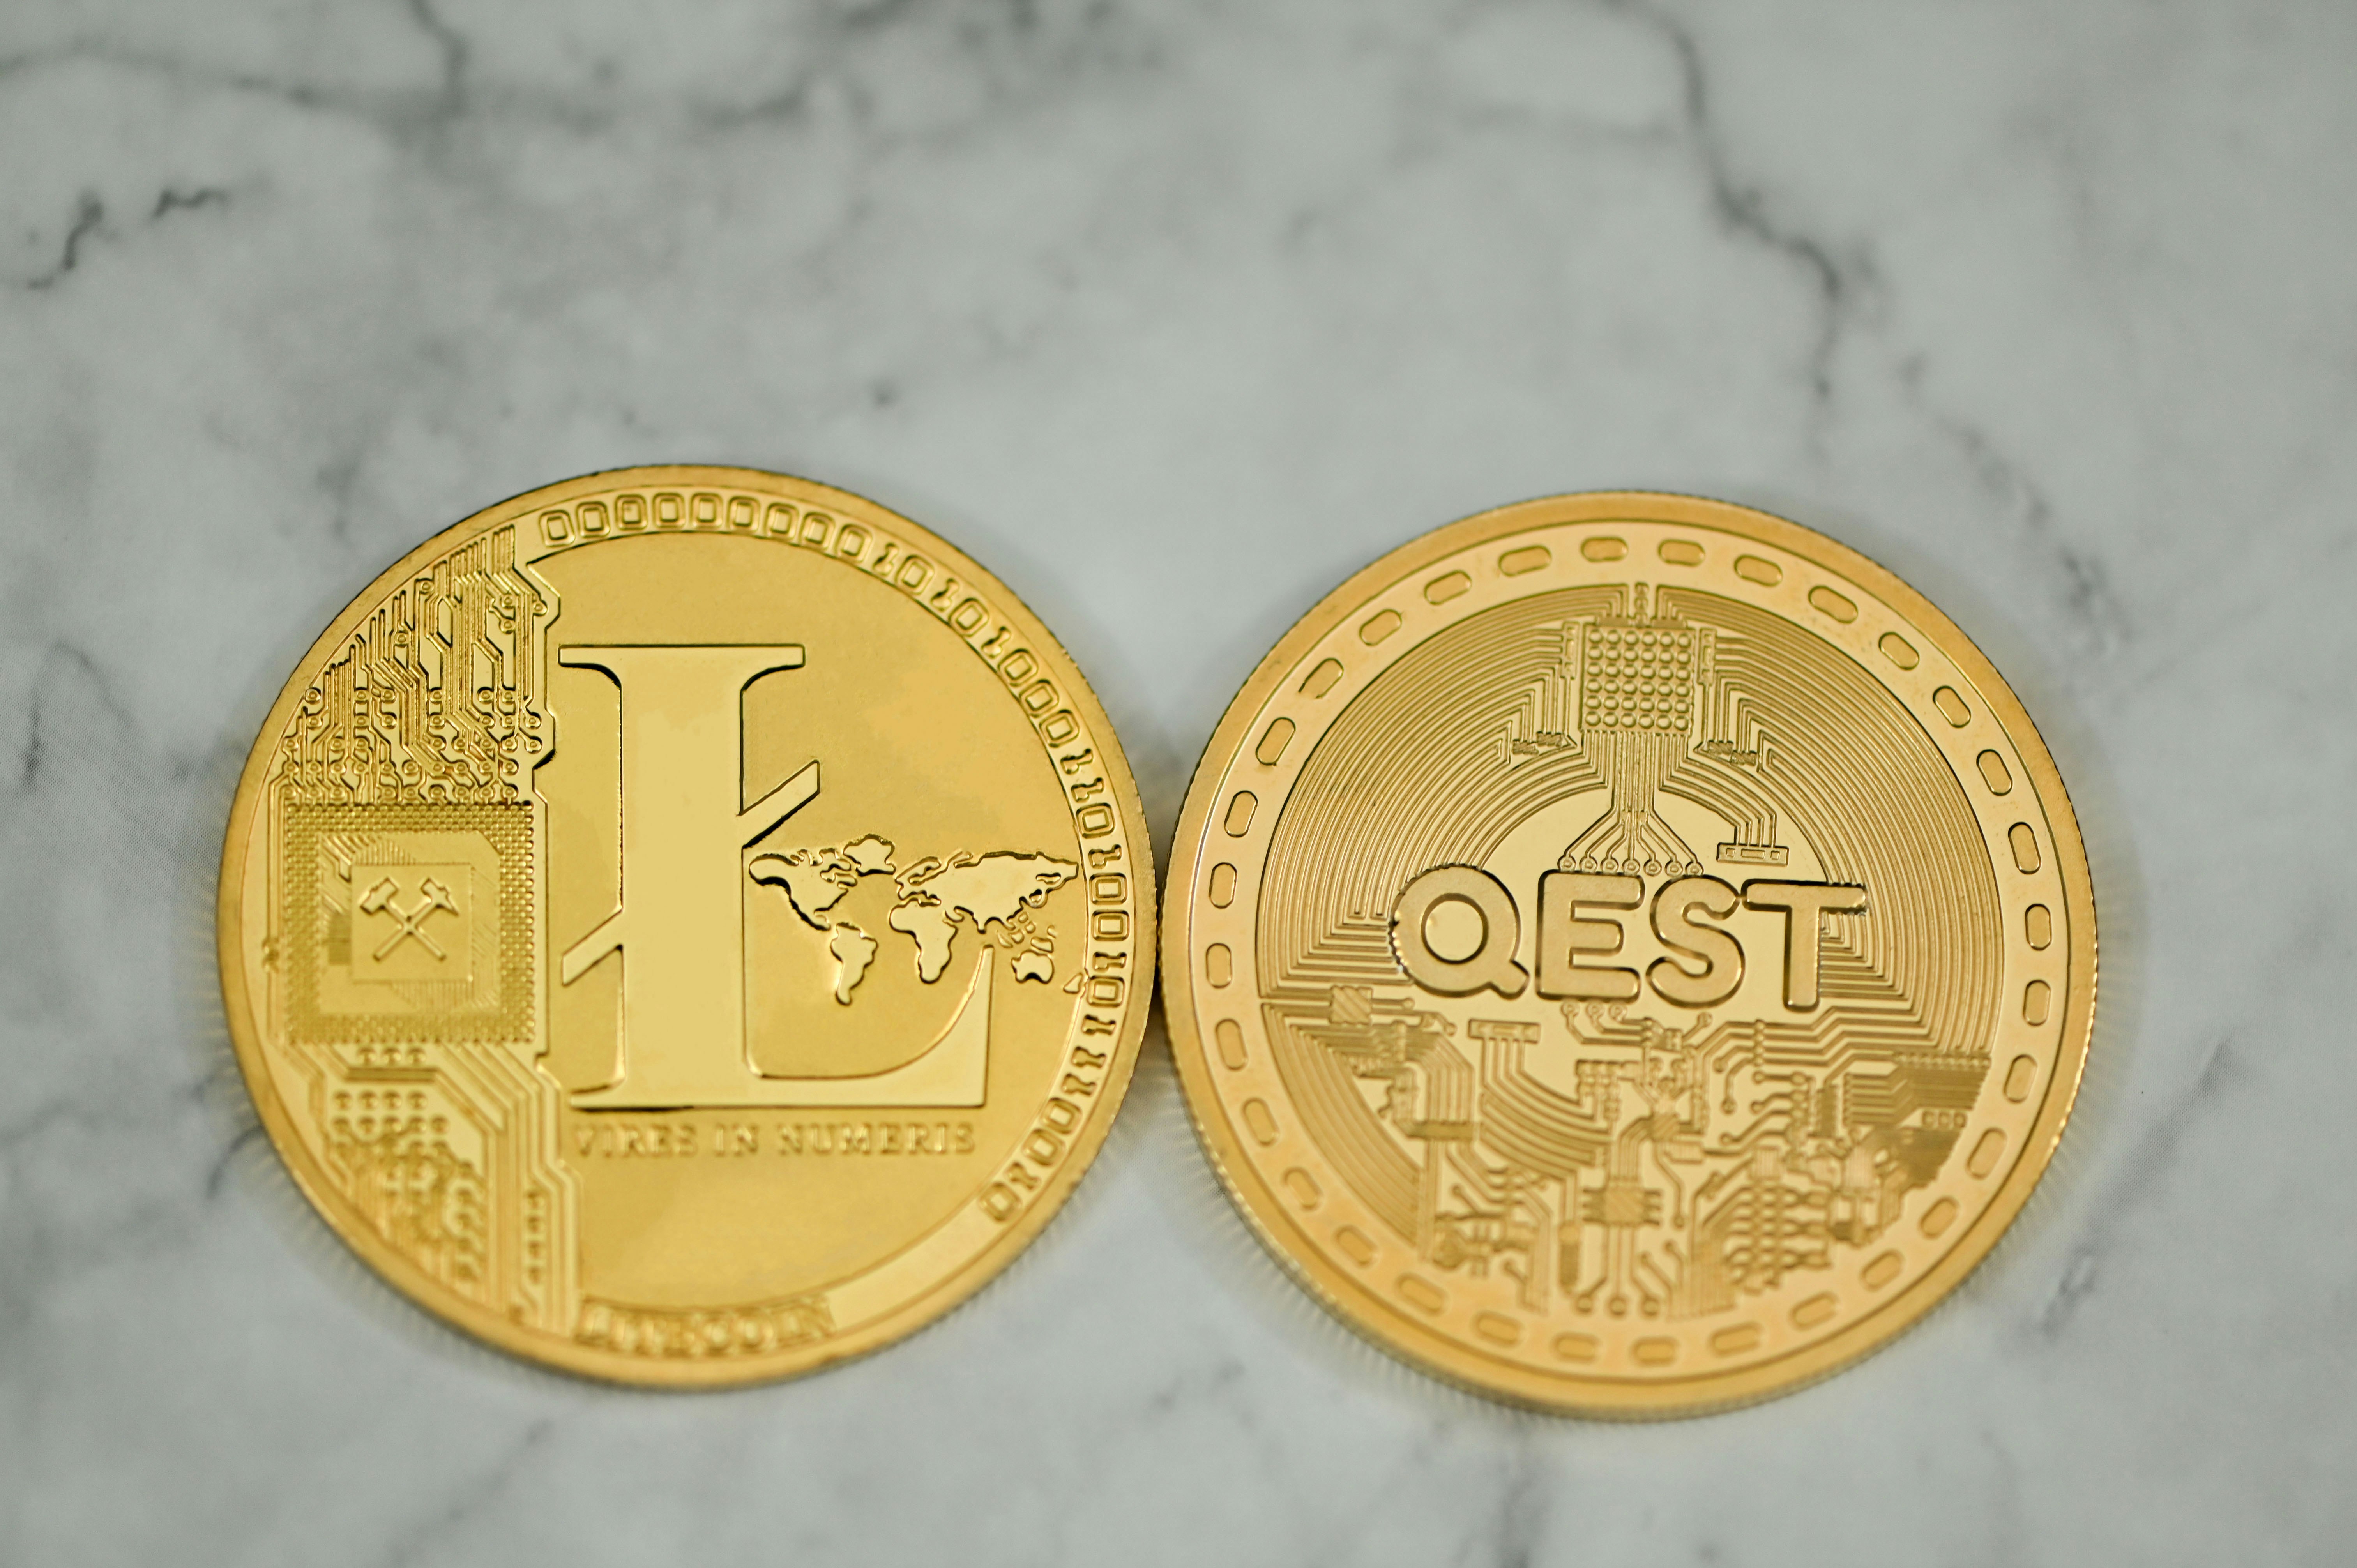 Litecoin and QEST coin together on a marble background